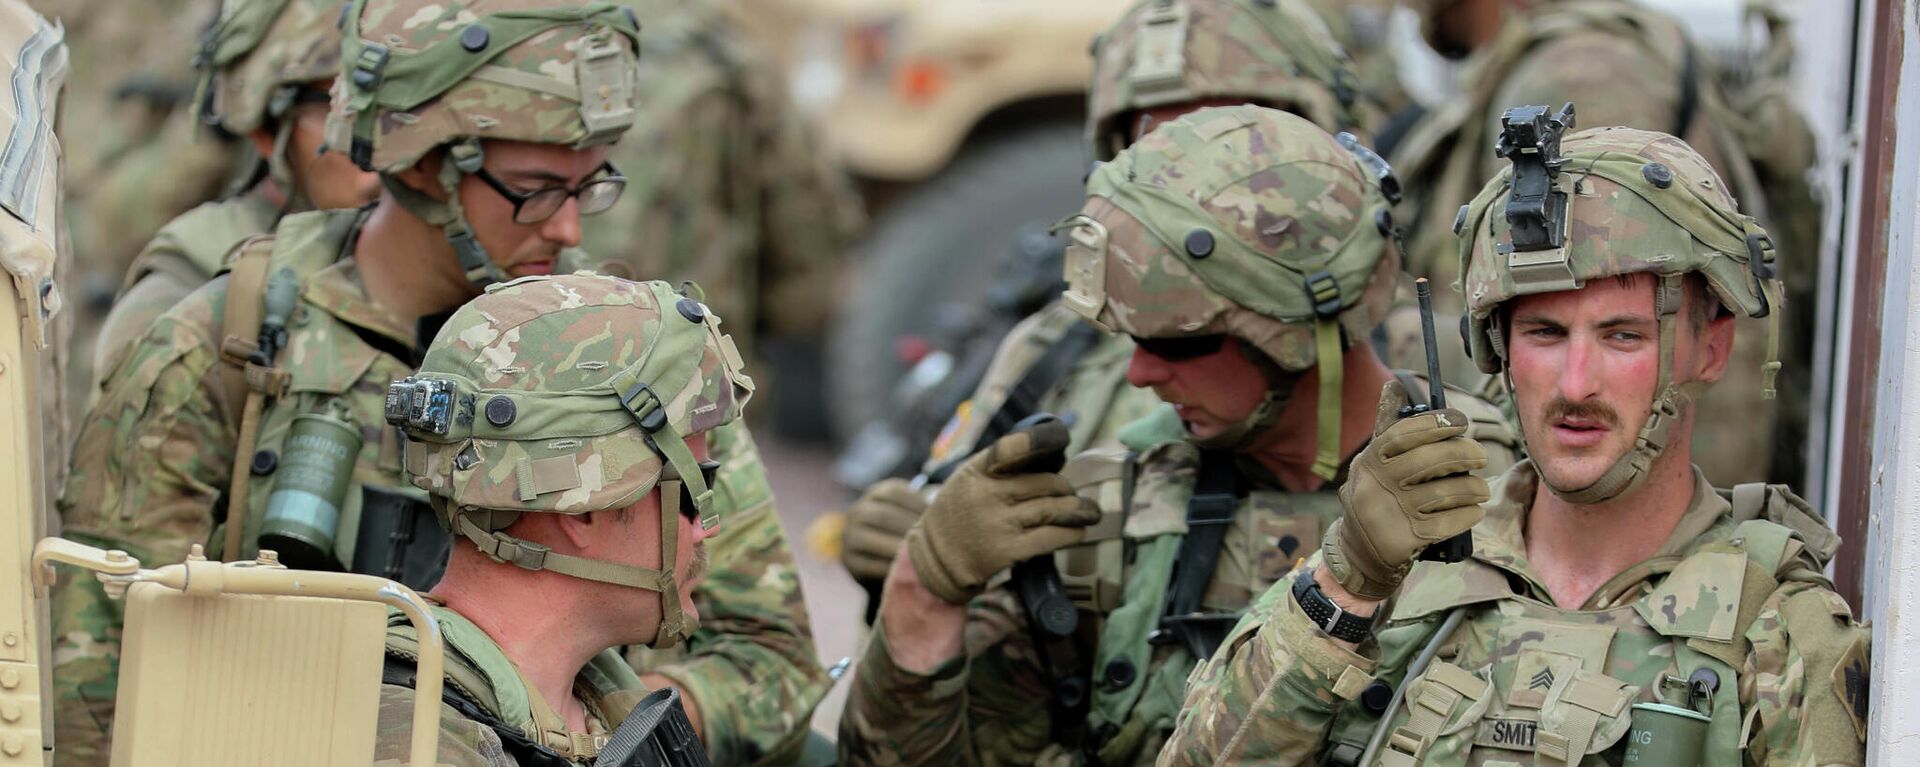 Soldiers with the 45th Infantry Brigade Combat Team, Oklahoma Army National Guard, stand in formation preparing to move towards a safehouse during a training exercise at the National Training Center in Fort Irwin, California, July 21, 2021. Members of the 45th IBCT are participating in the Battle of Razish located in a mock-town that simulates a war-like experience and includes a fight from the on post opposing force with the intent of increasing readiness among Soldiers.  - Sputnik International, 1920, 03.12.2021